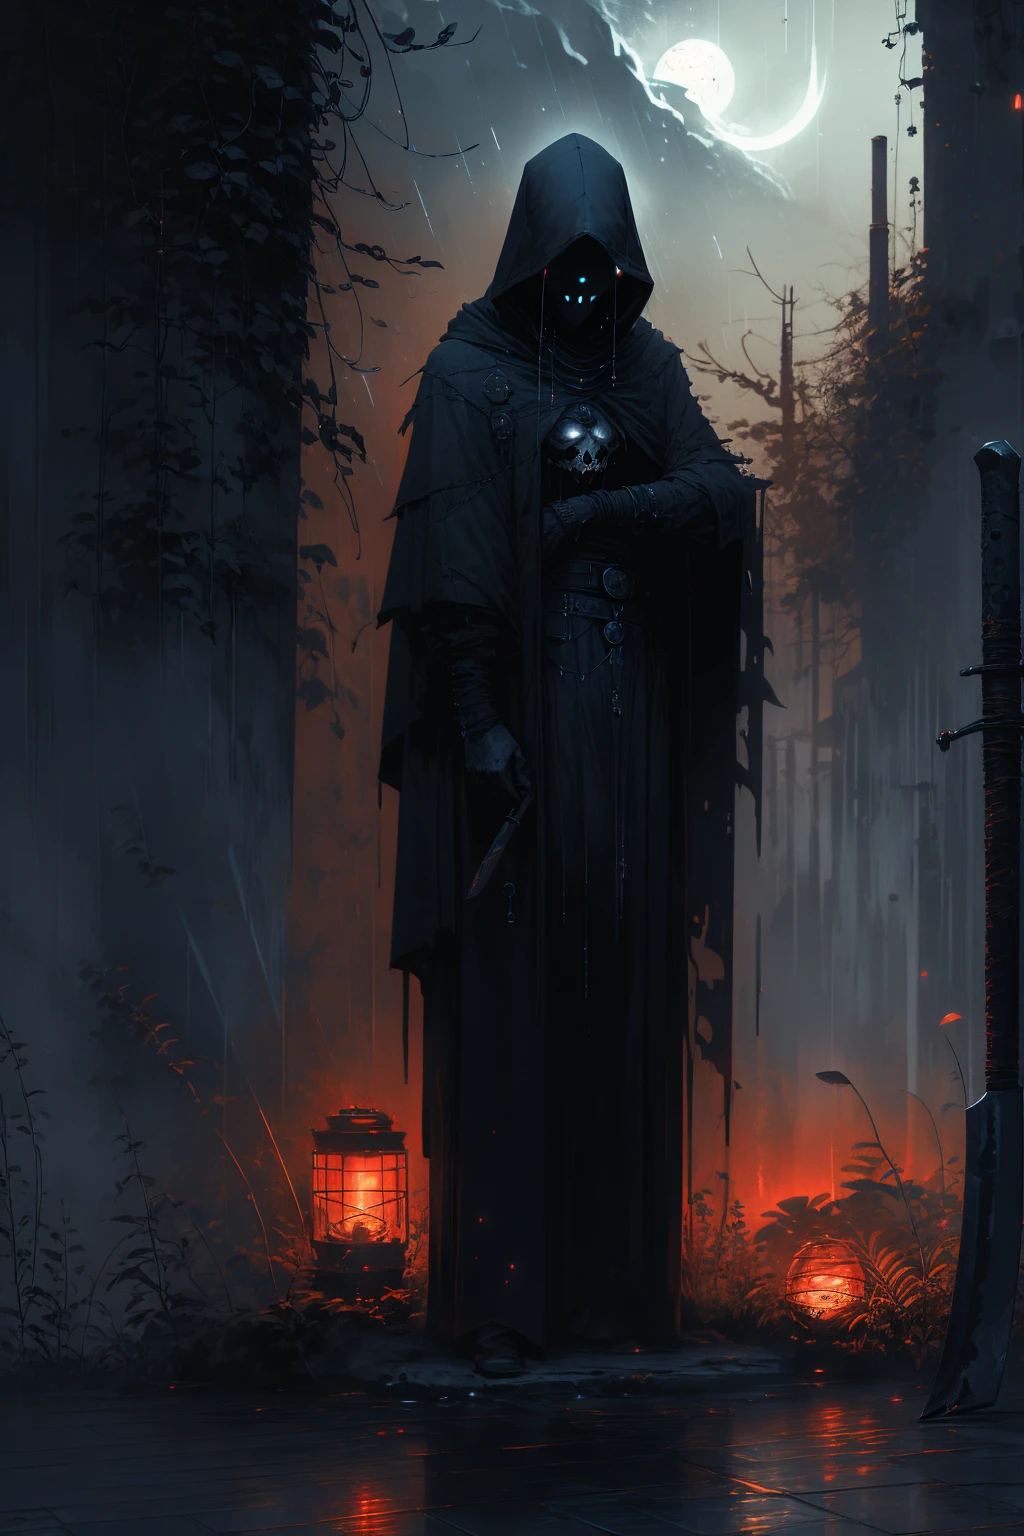 (best quality,highres),detailed reaper with scythe,ominous atmosphere,dark fantasy,gothic style,heavy shadows,misty fog,moonlit night,rustling leaves,sinister presence,mysterious figure,sharp sickle,hooded cloak,ethereal glow,ominous sky,chilling wind,ominous aura,gloomy setting,whispering echoes,haunting landscape,spectral beauty,color contrast,dramatic composition,spooky vibes,dark imagery.